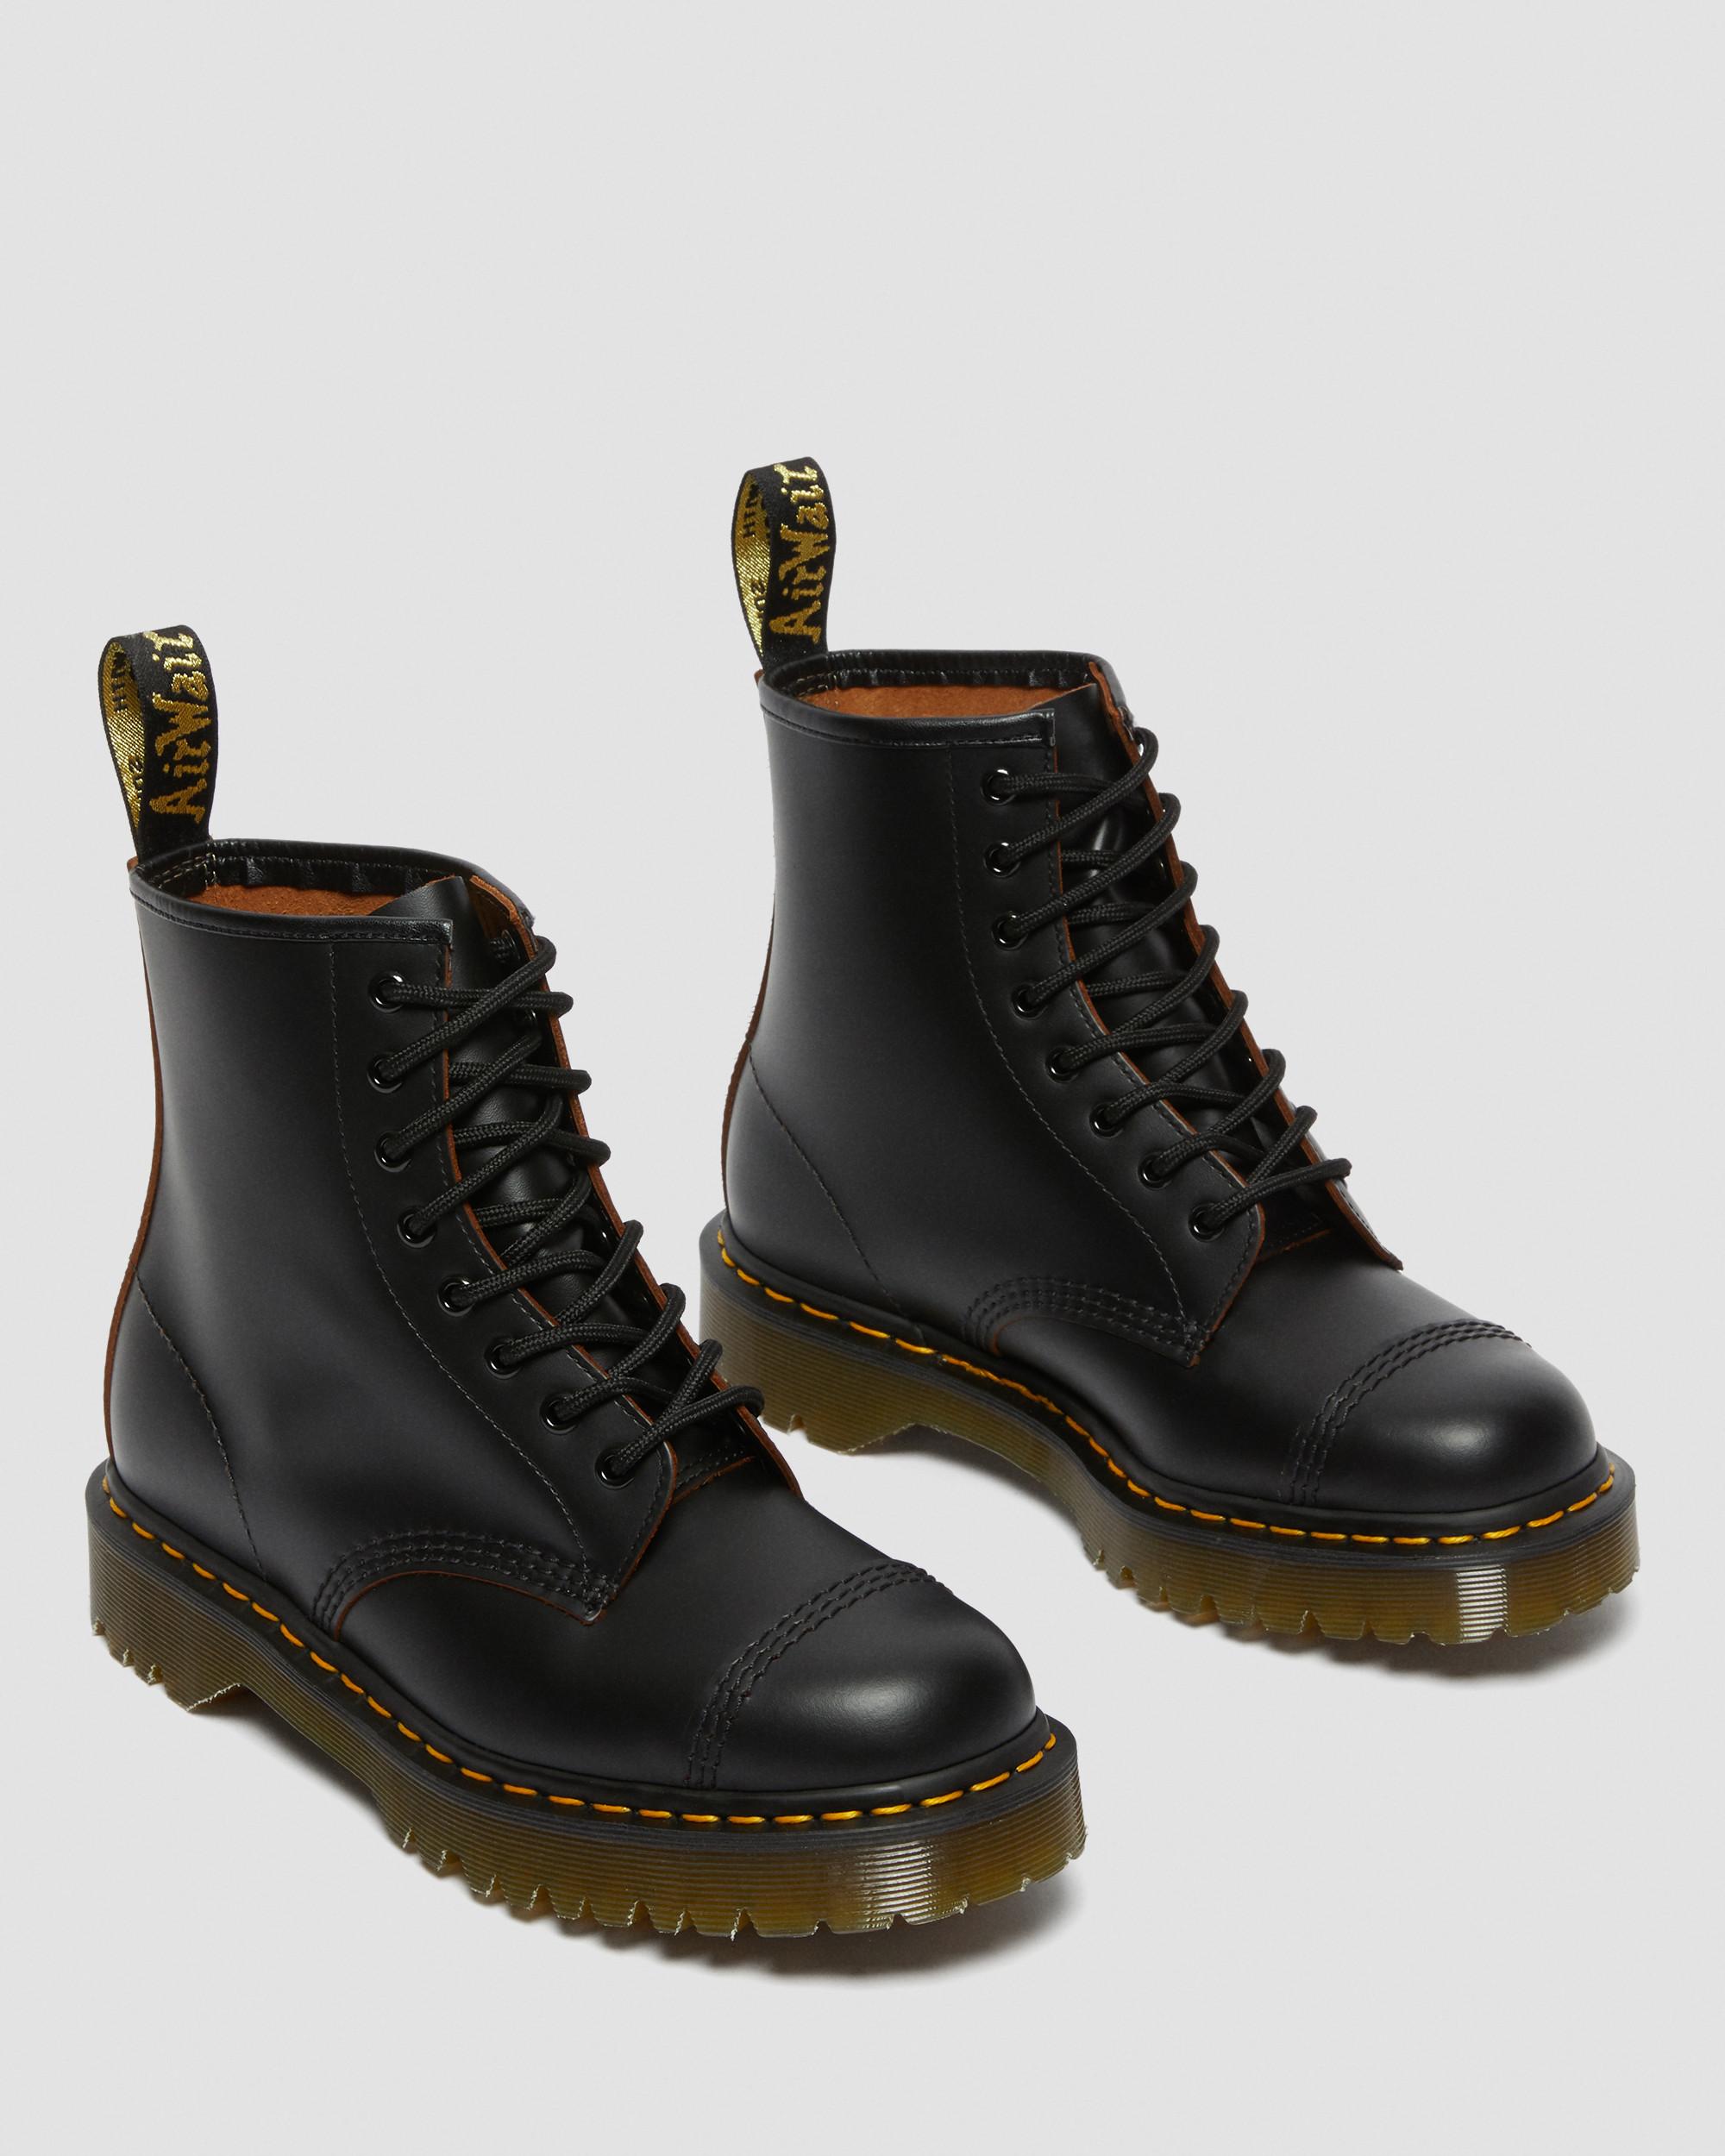 1460 Bex Made in England Toe Cap Lace Up Boots, Black | Dr. Martens